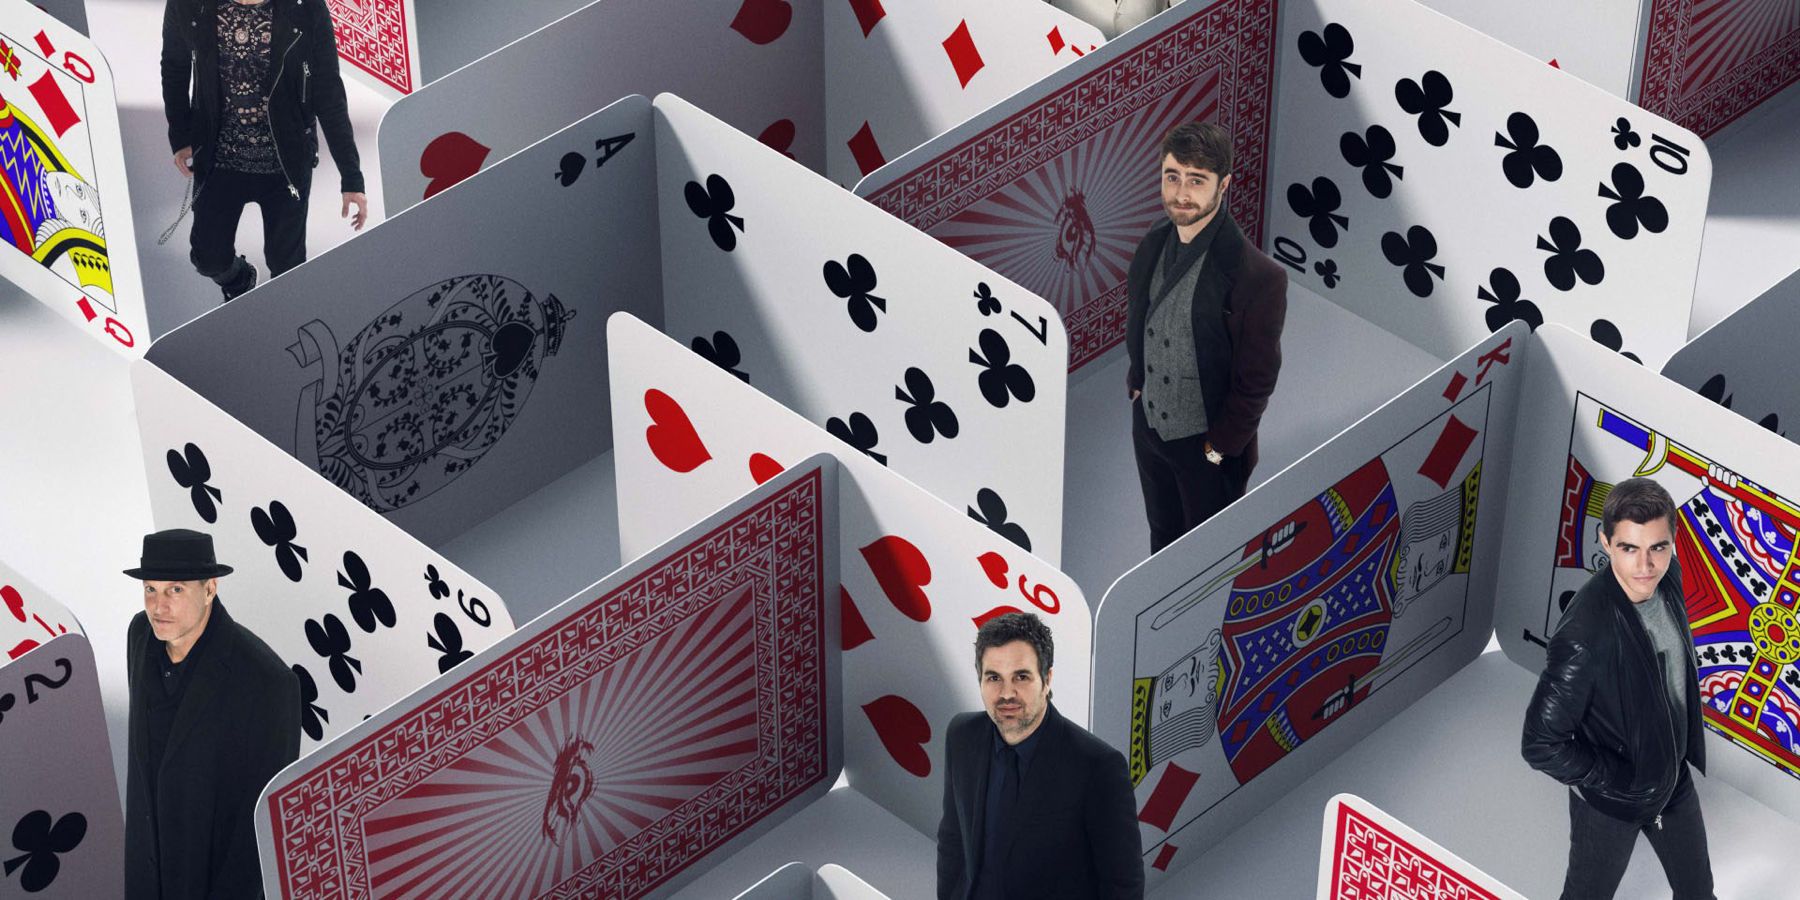 The characters of Now You See Me 2 wander through a maze of playing cards in a promo image for the film.